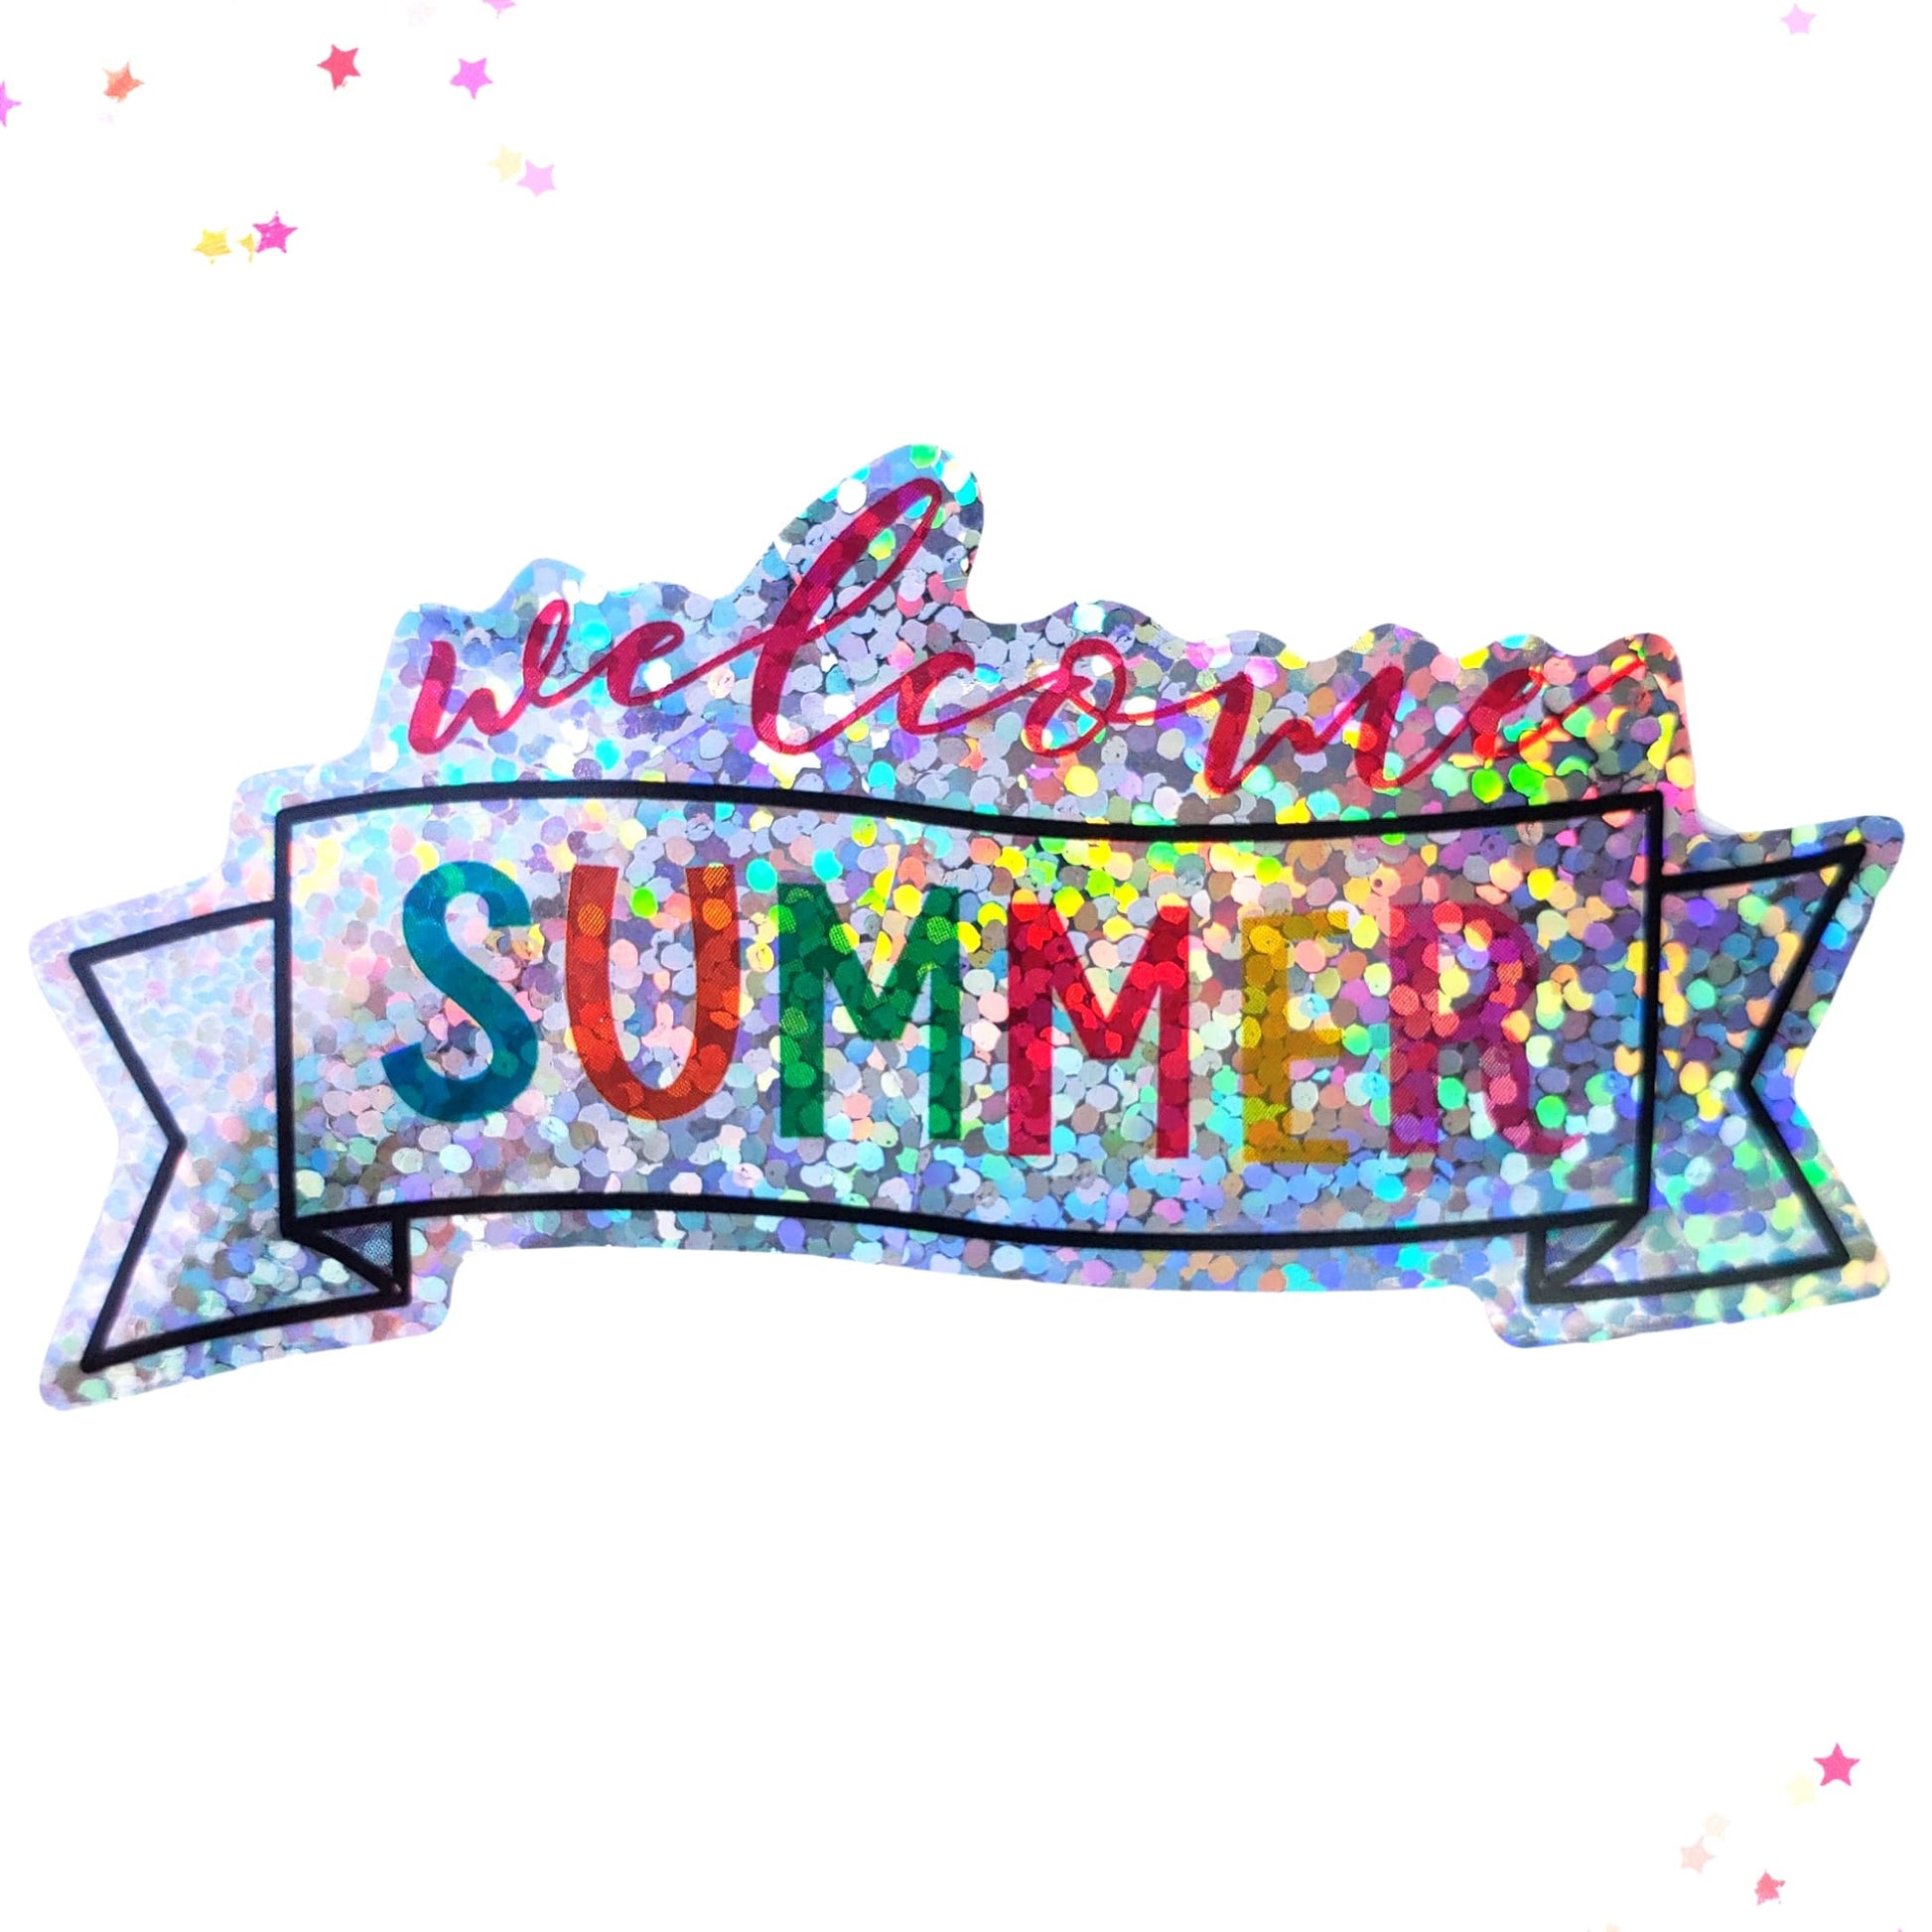 Premium Sticker - Sparkly Holographic Glitter Welcome Summer Banner from Confetti Kitty, Only 2.00